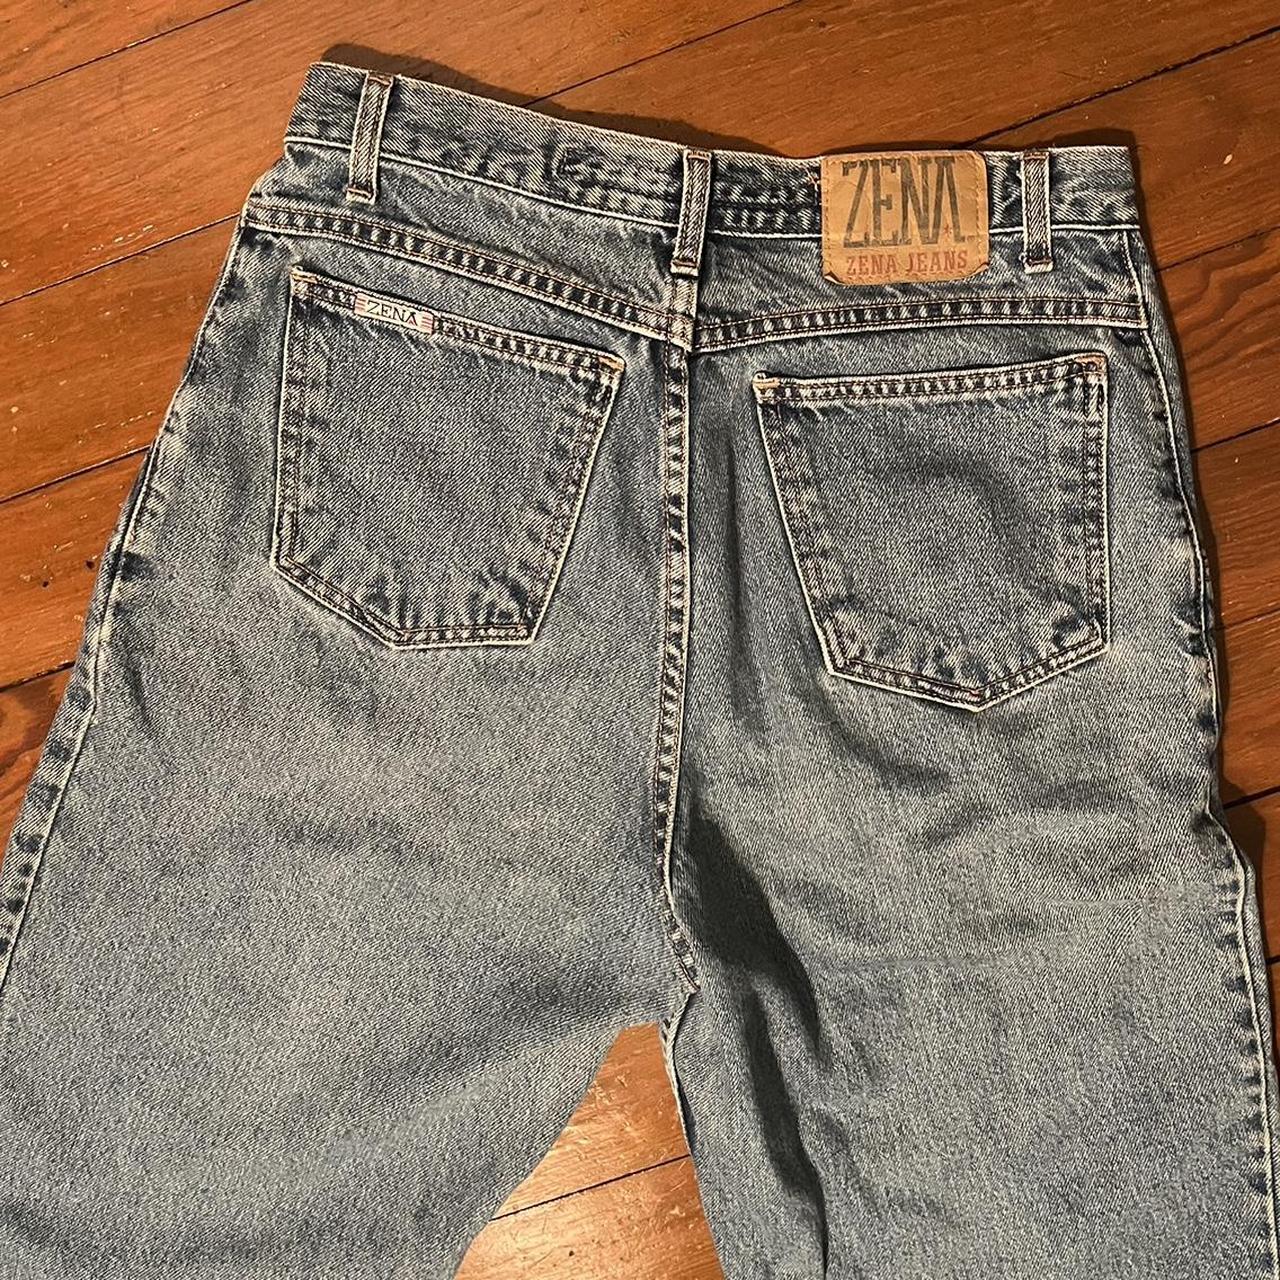 Vintage Zena jeans Tag says size 12 but fit around an 8 - Depop